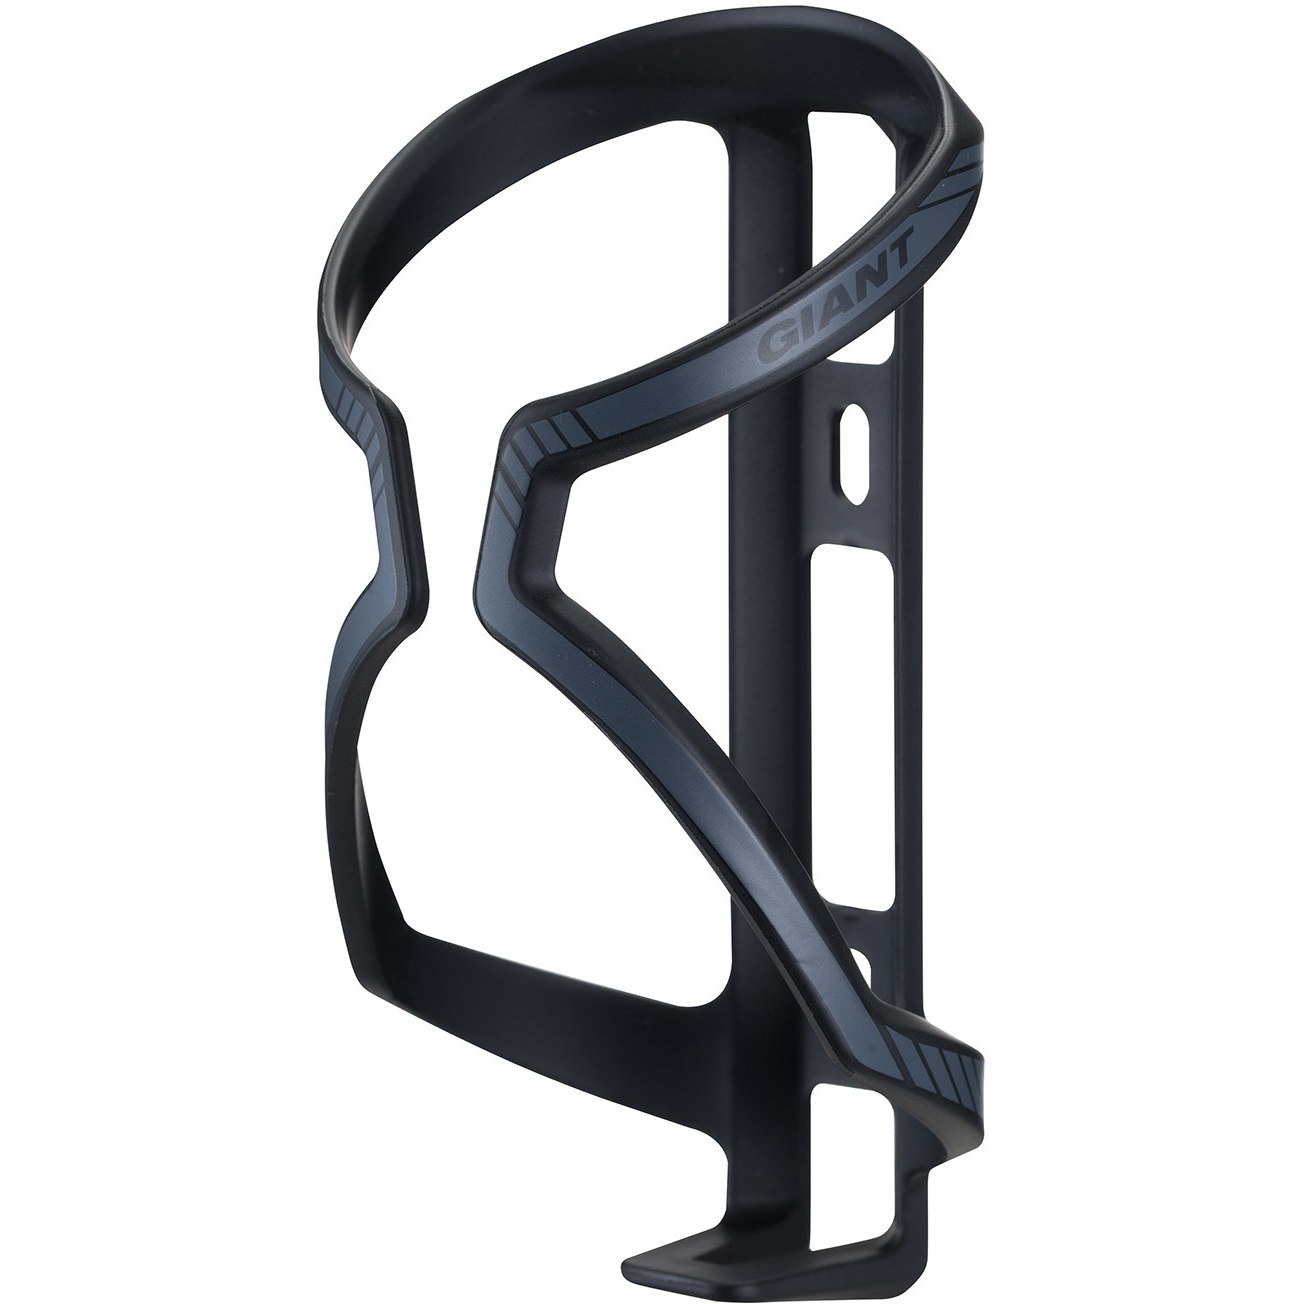 Image of Giant Airway Sport Cage - black/grey